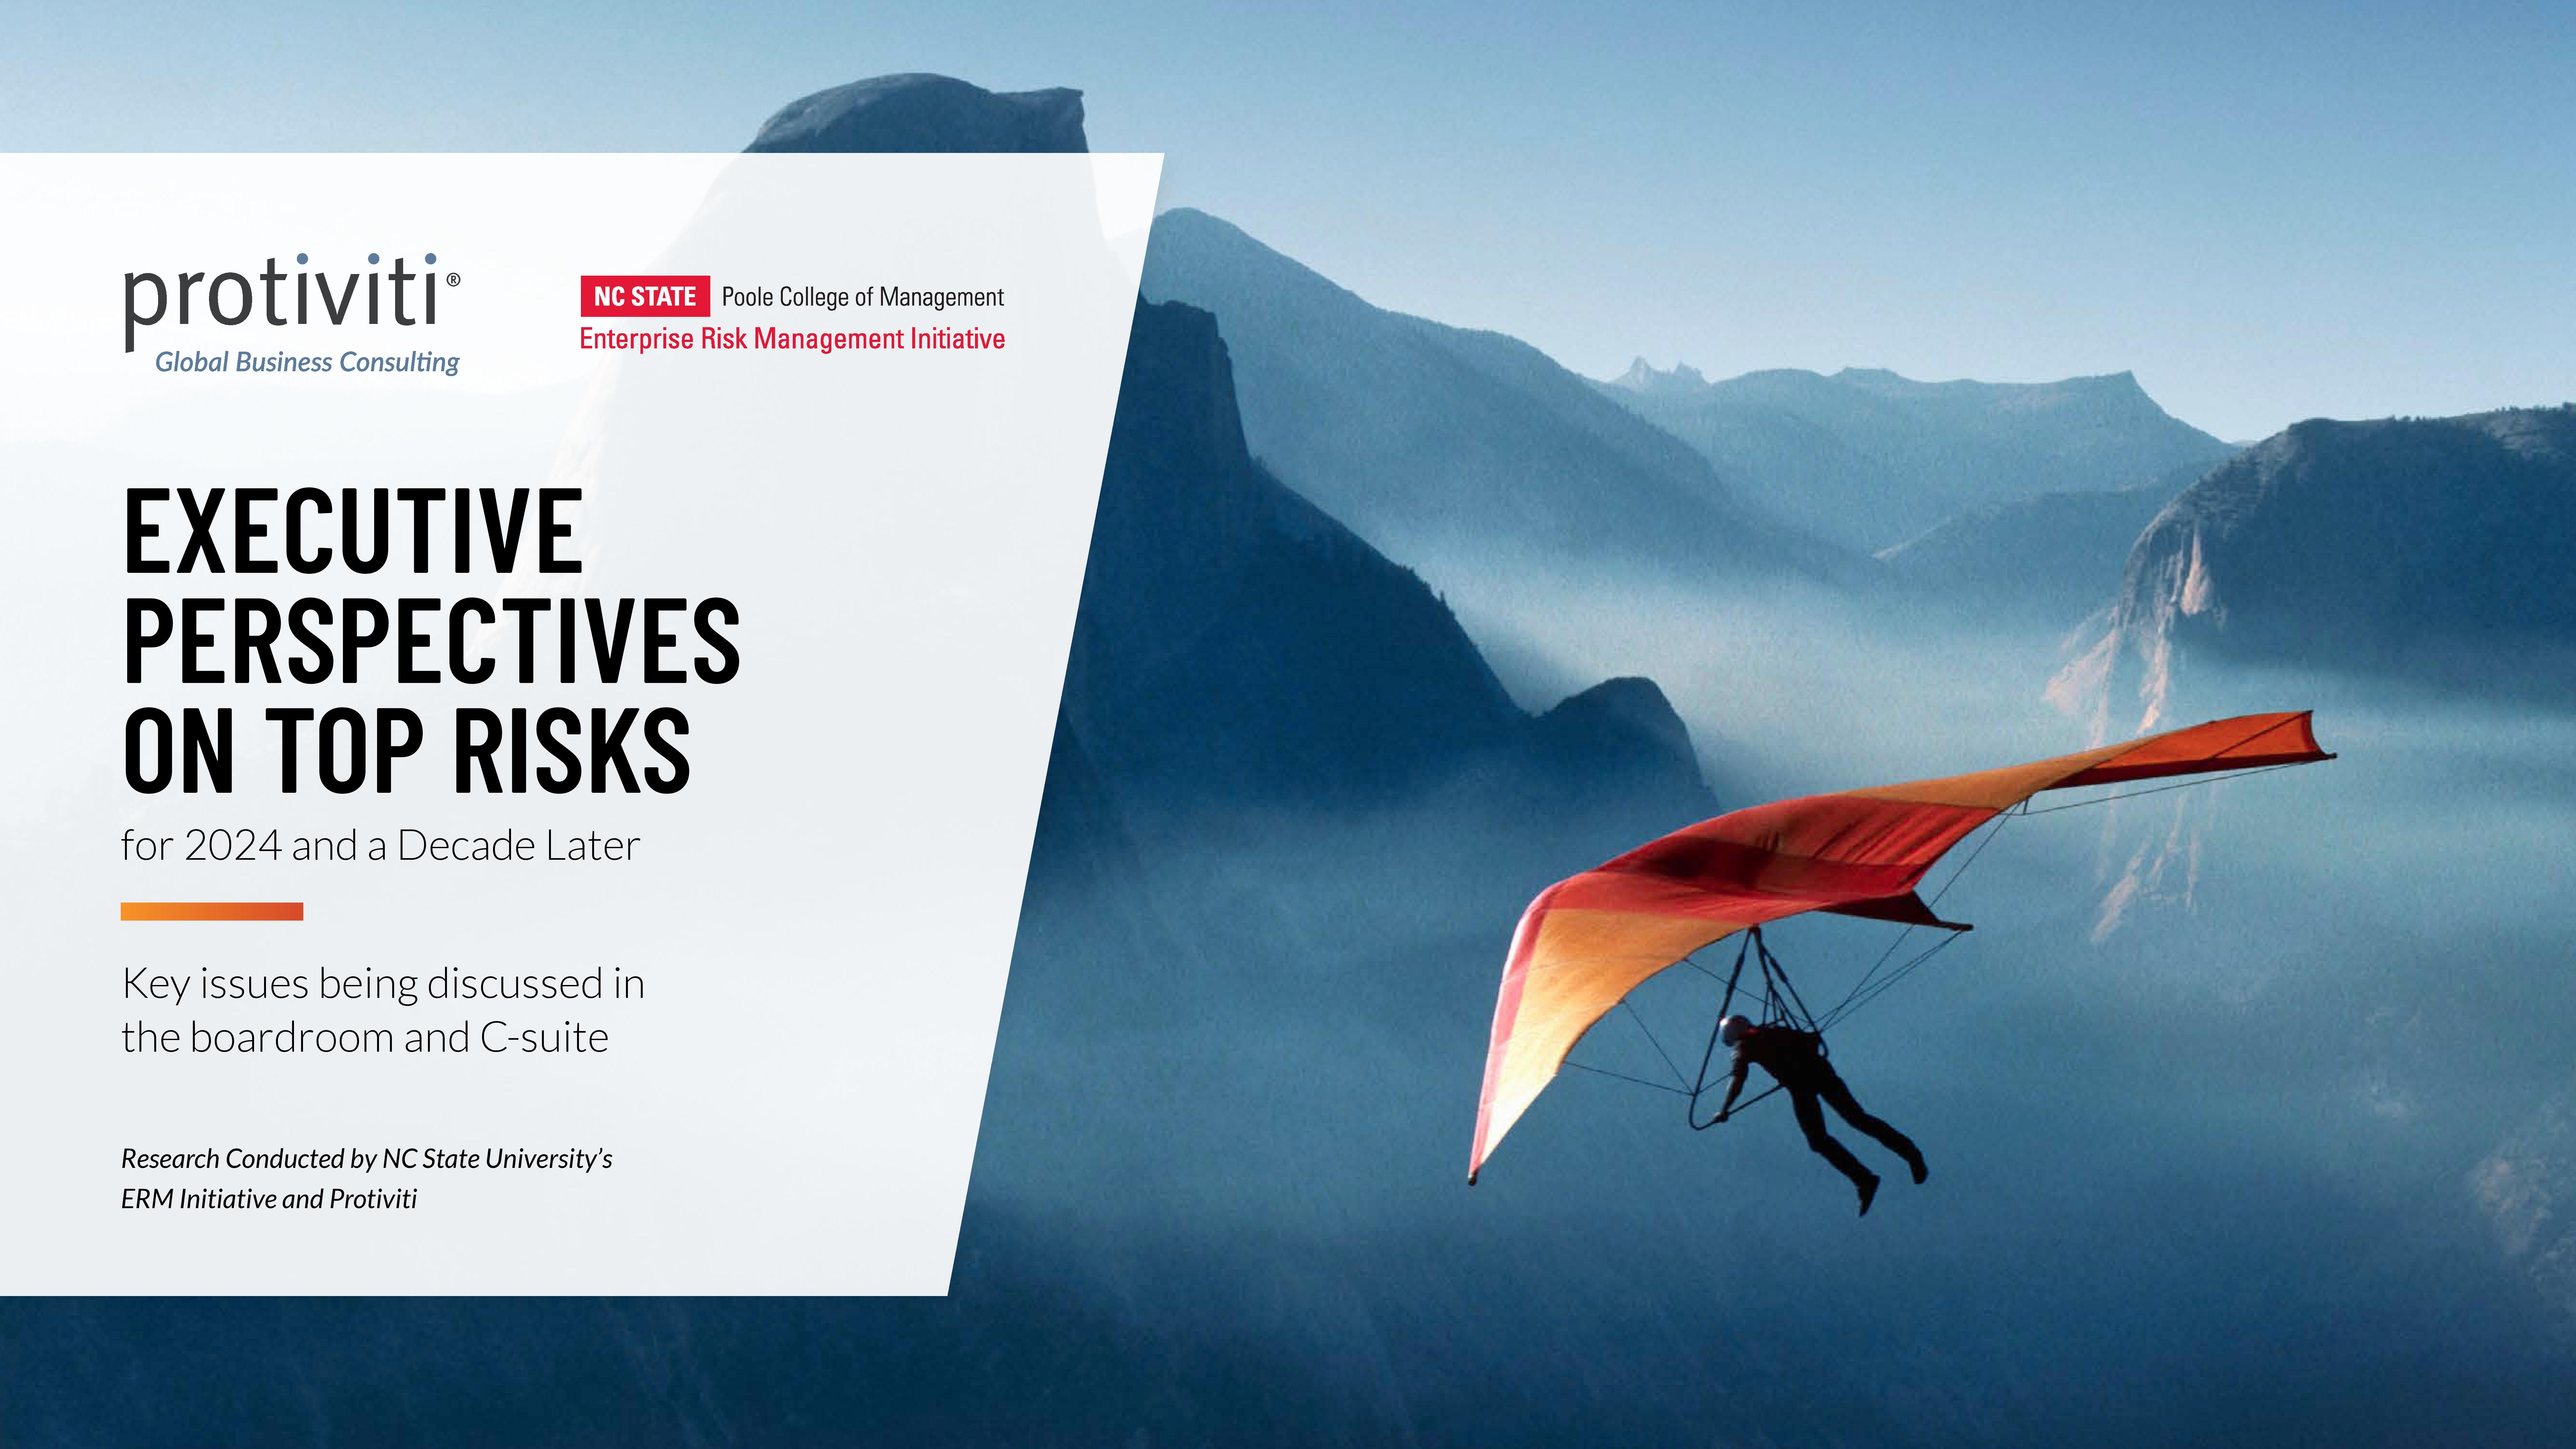 screenshot of the first page of Executive Perspectives on Top Risks for 2024 and a Decade Later